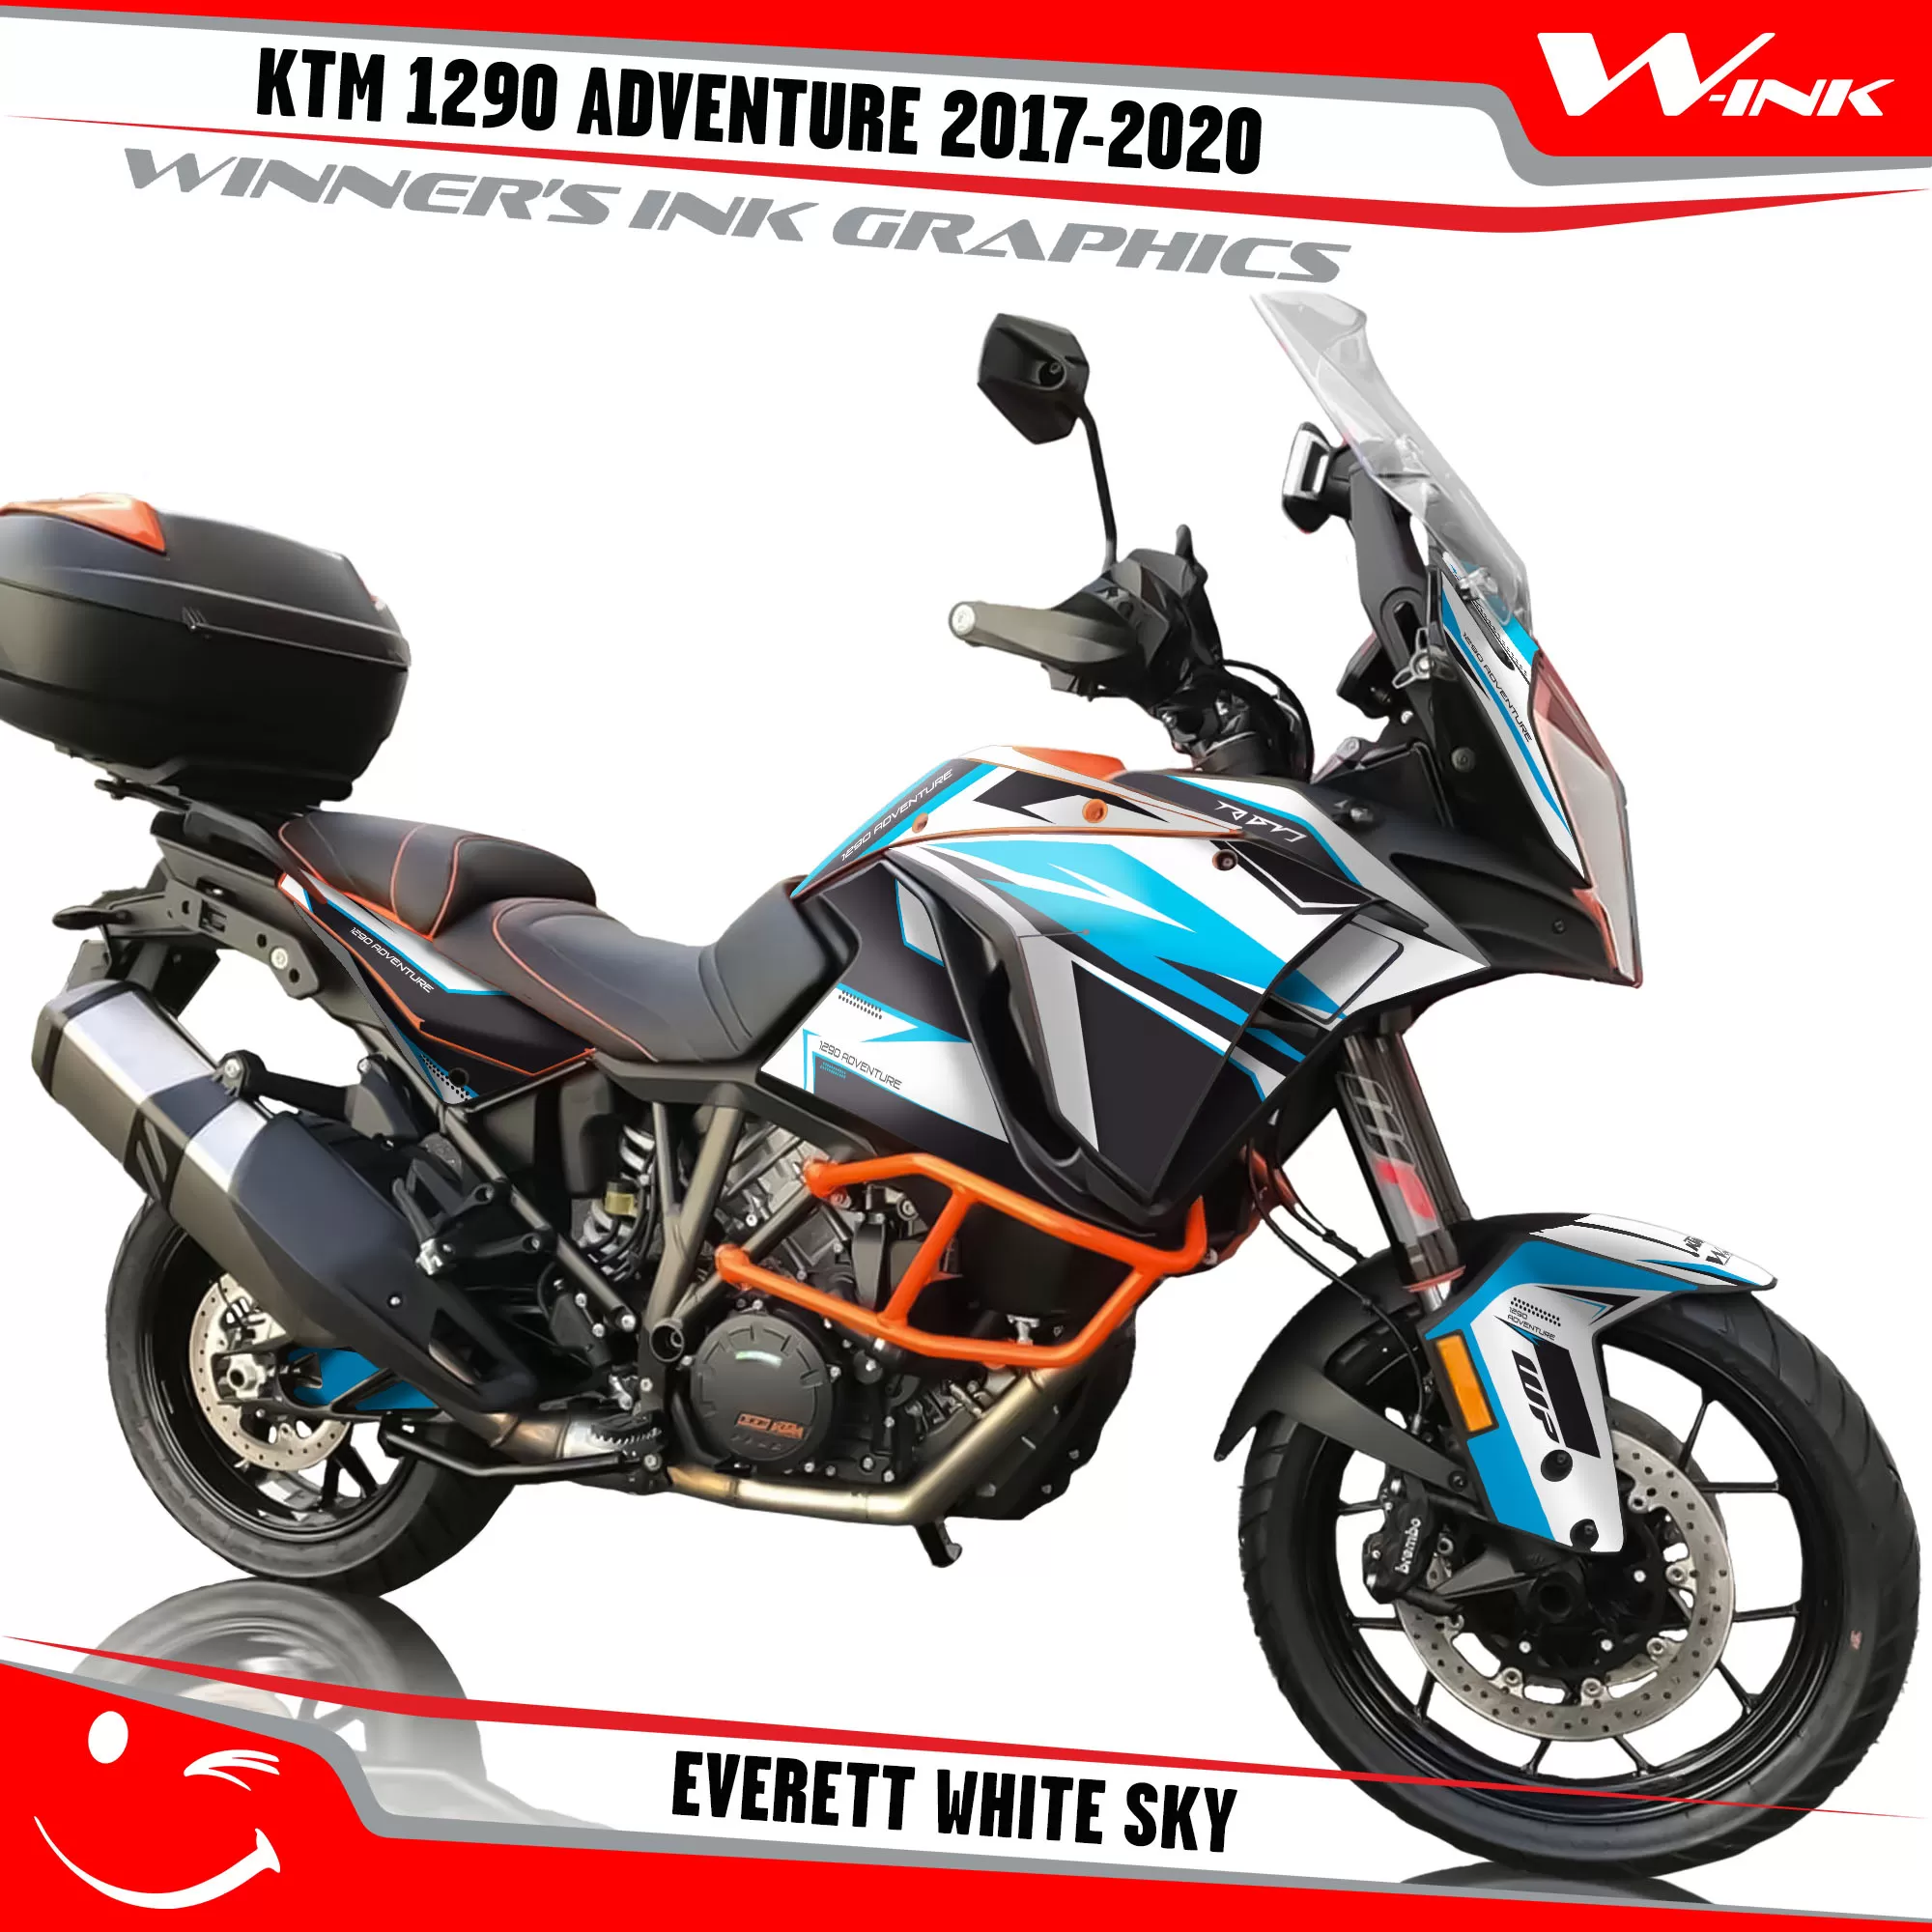 KTM-Adventure-1290-2017-2018-2019-2020-graphics-kit-and-decals-Everett-White-Sky